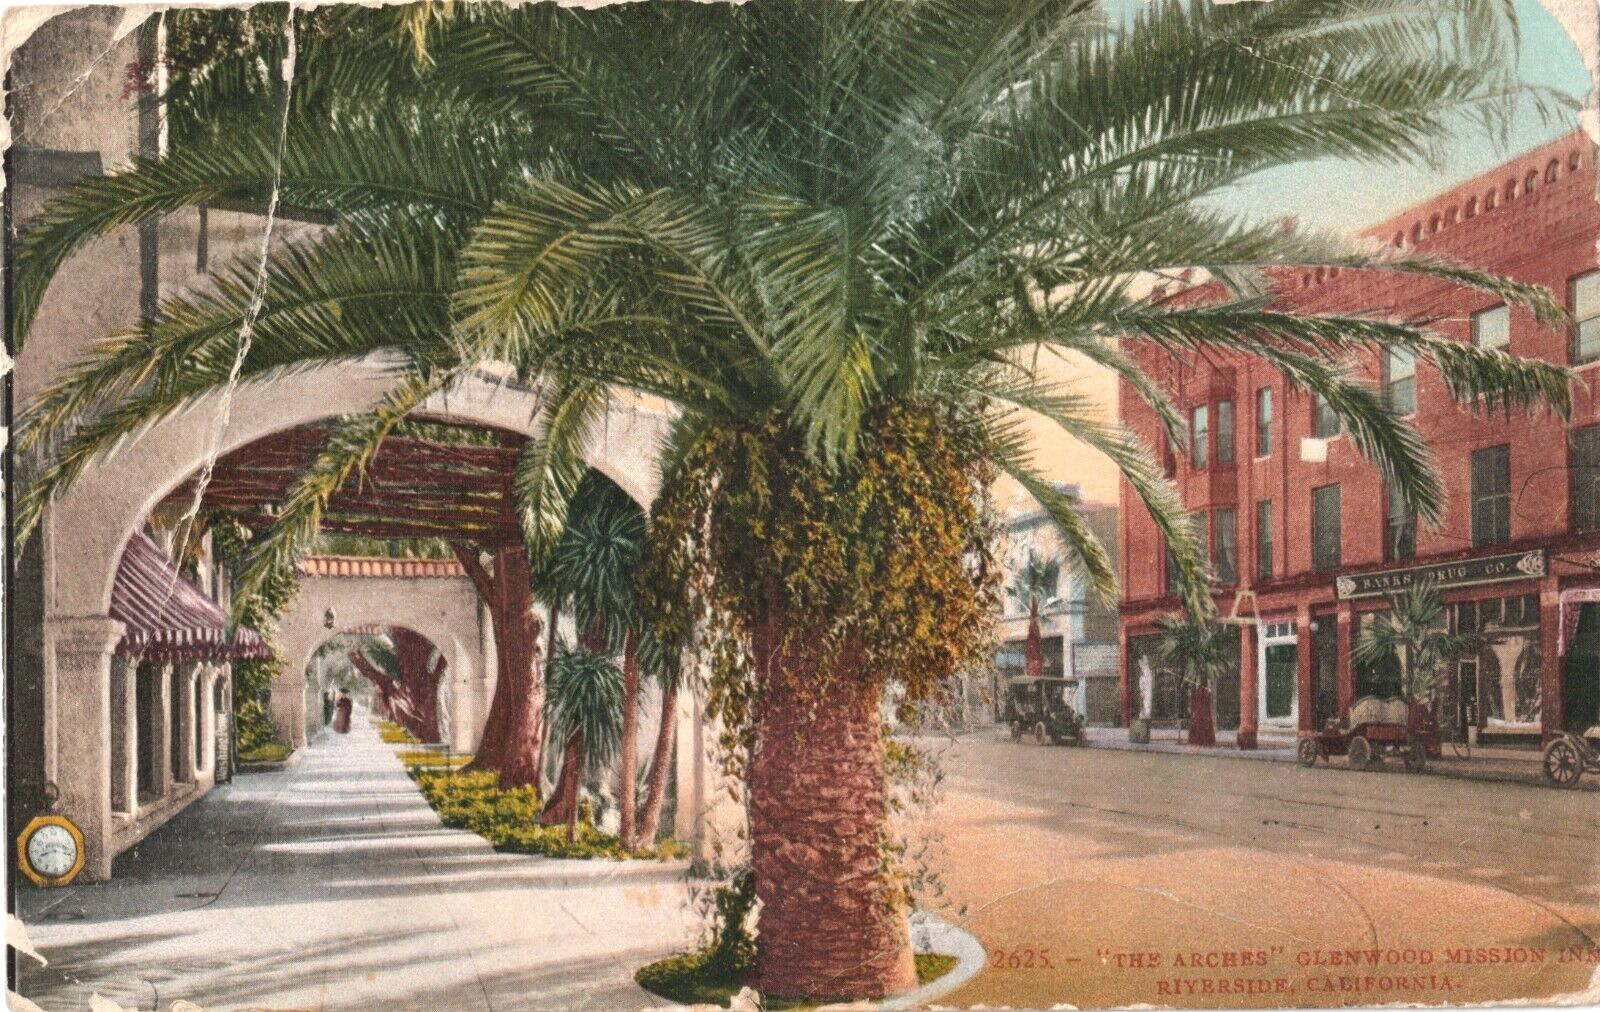 The Arches-Glenwood Mission Inn-Riverside California CA-1926 posted-drug store